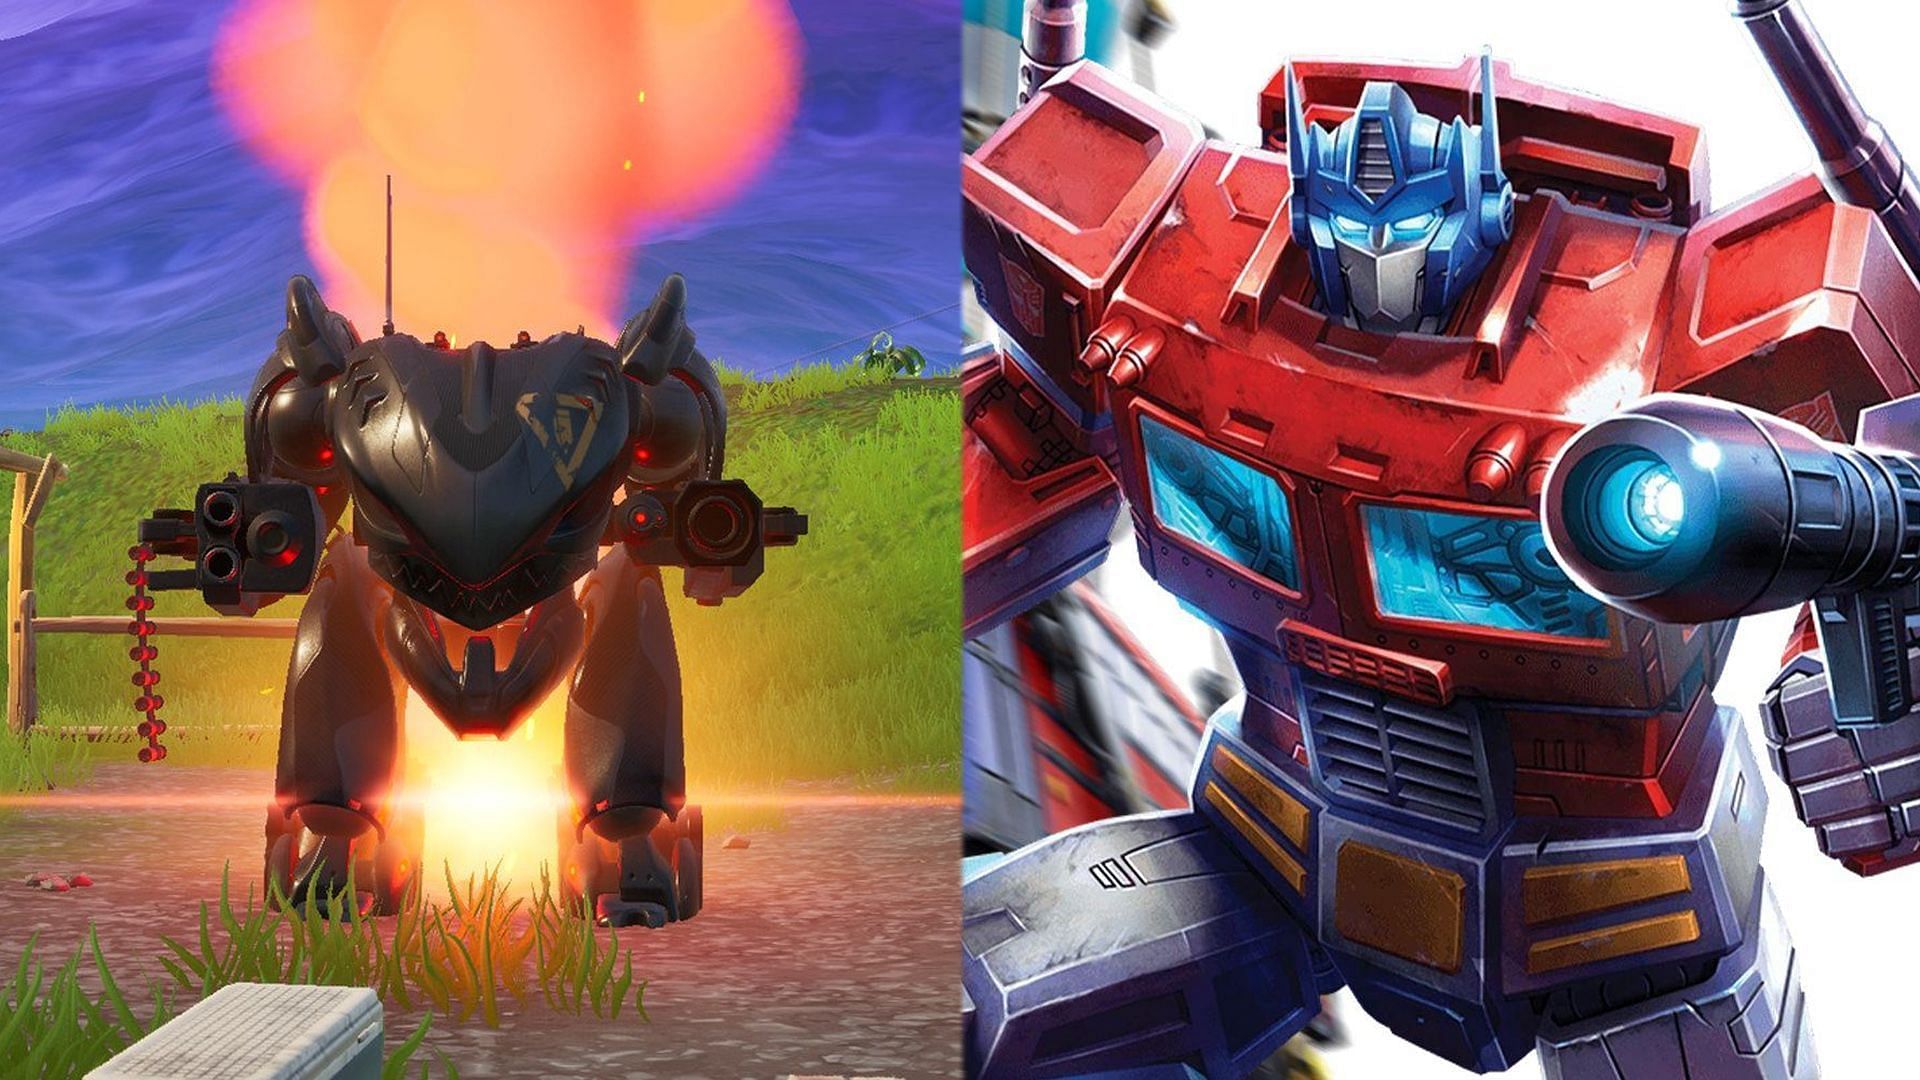 New Fortnite leak has revealed taht a Transformers-like vehicle is coming to the game (Image via InTheShadeYT/Twitter and Sportskeeda)